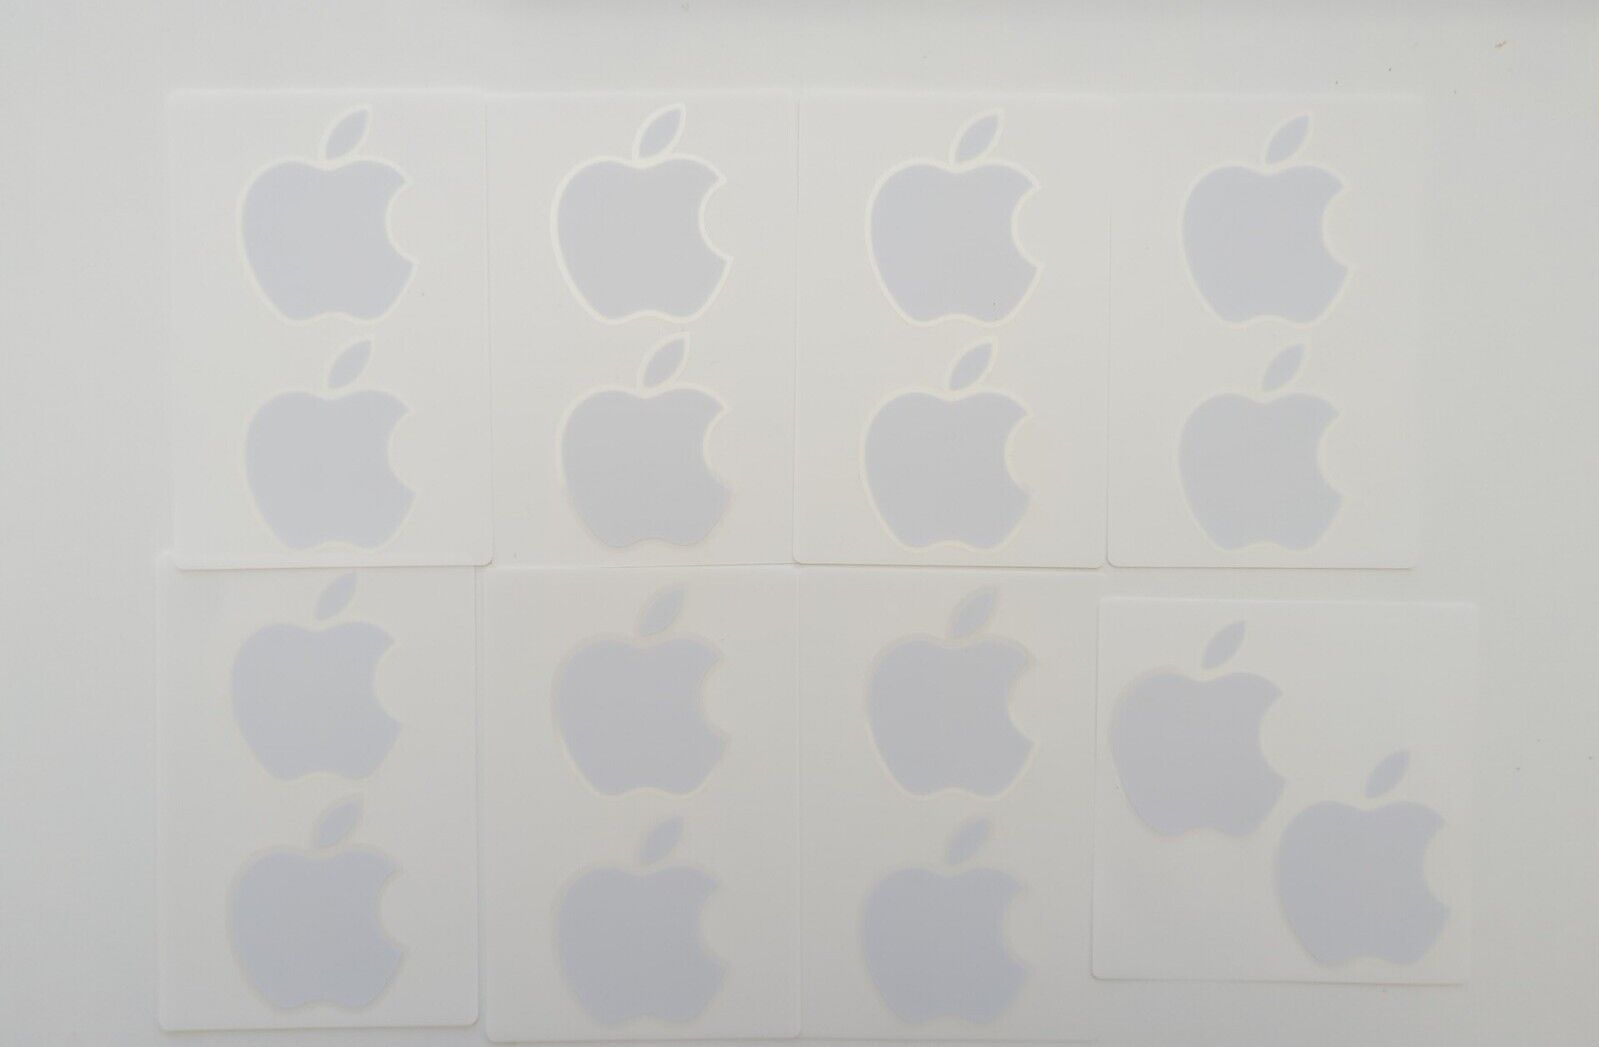 16 STICKERS - APPLE LOGO Decal - Genuine OEM 16 Total iPAD iPhone - 8 SHEETS